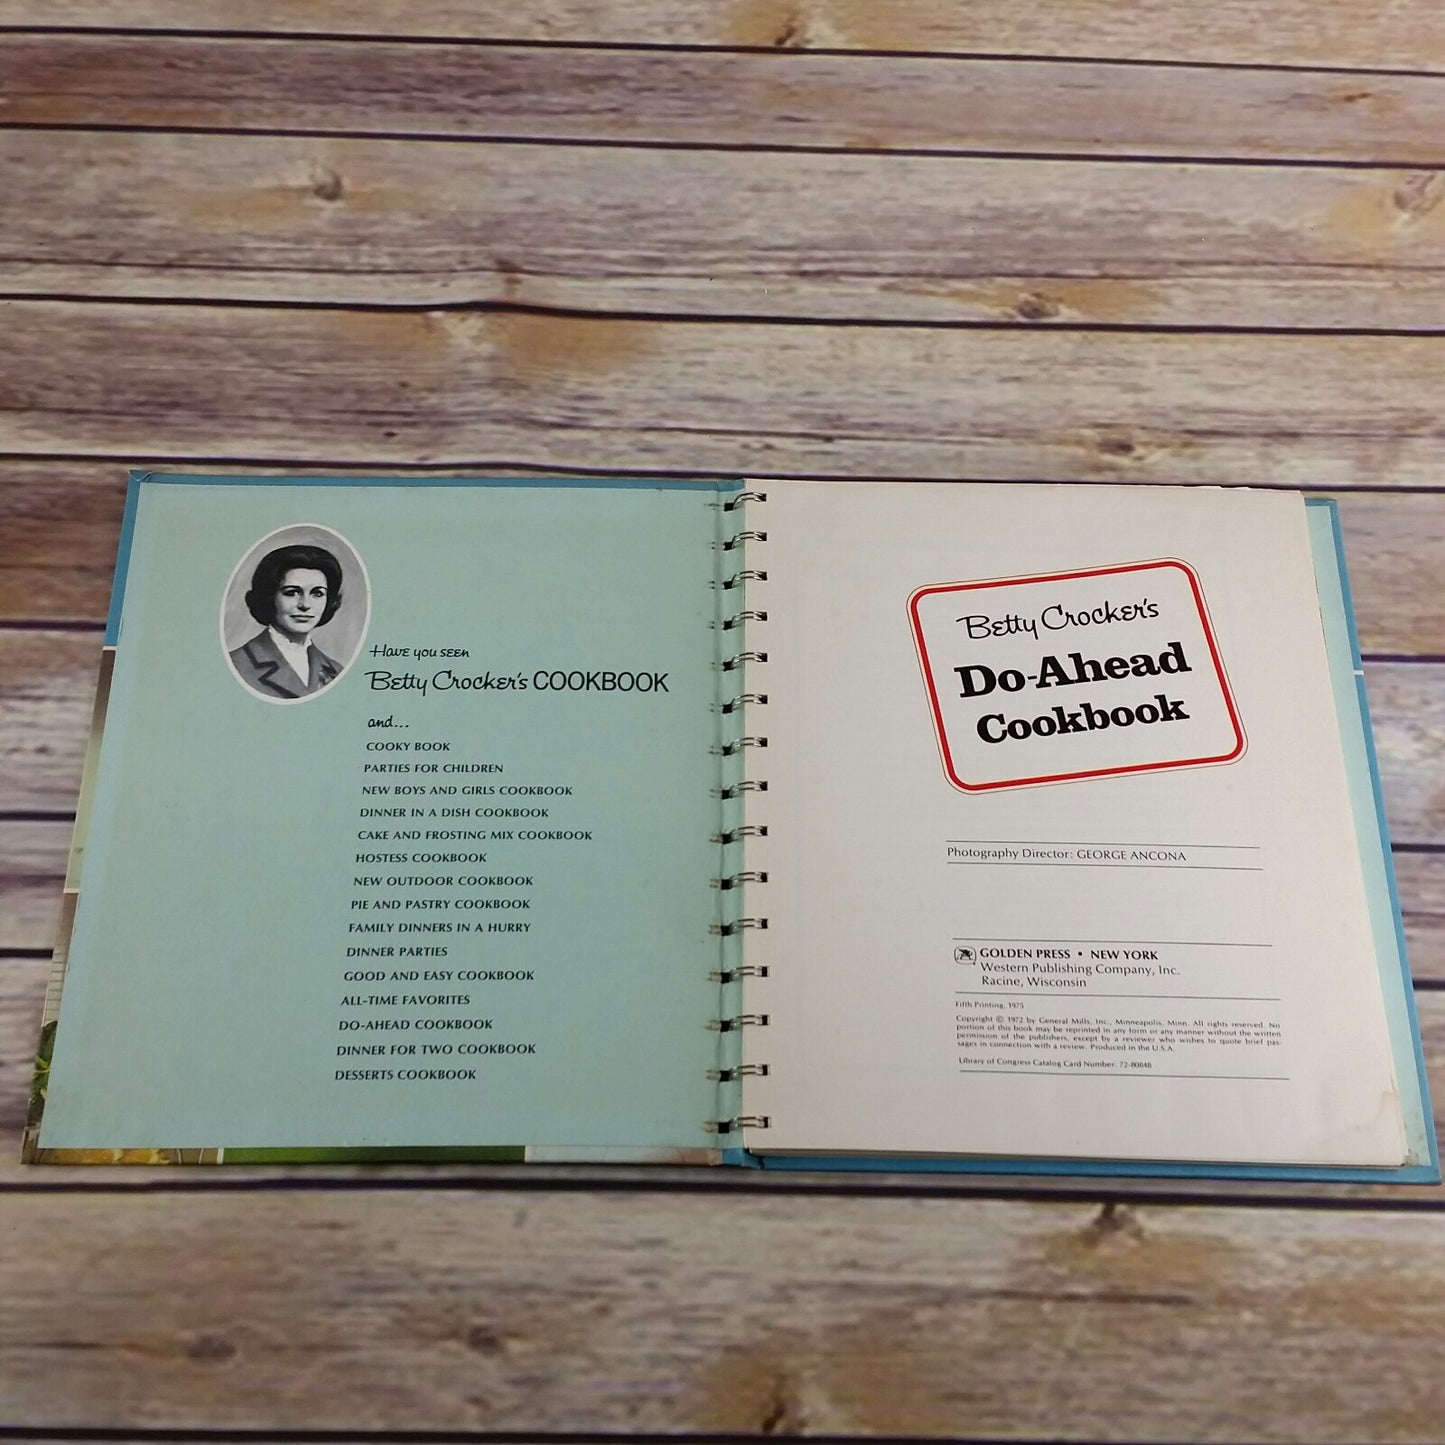 Vintage Cookbook Betty Crocker Do Ahead Recipes 1975 From Freezer and Refrigerator Hardcover Spiral Bound - At Grandma's Table